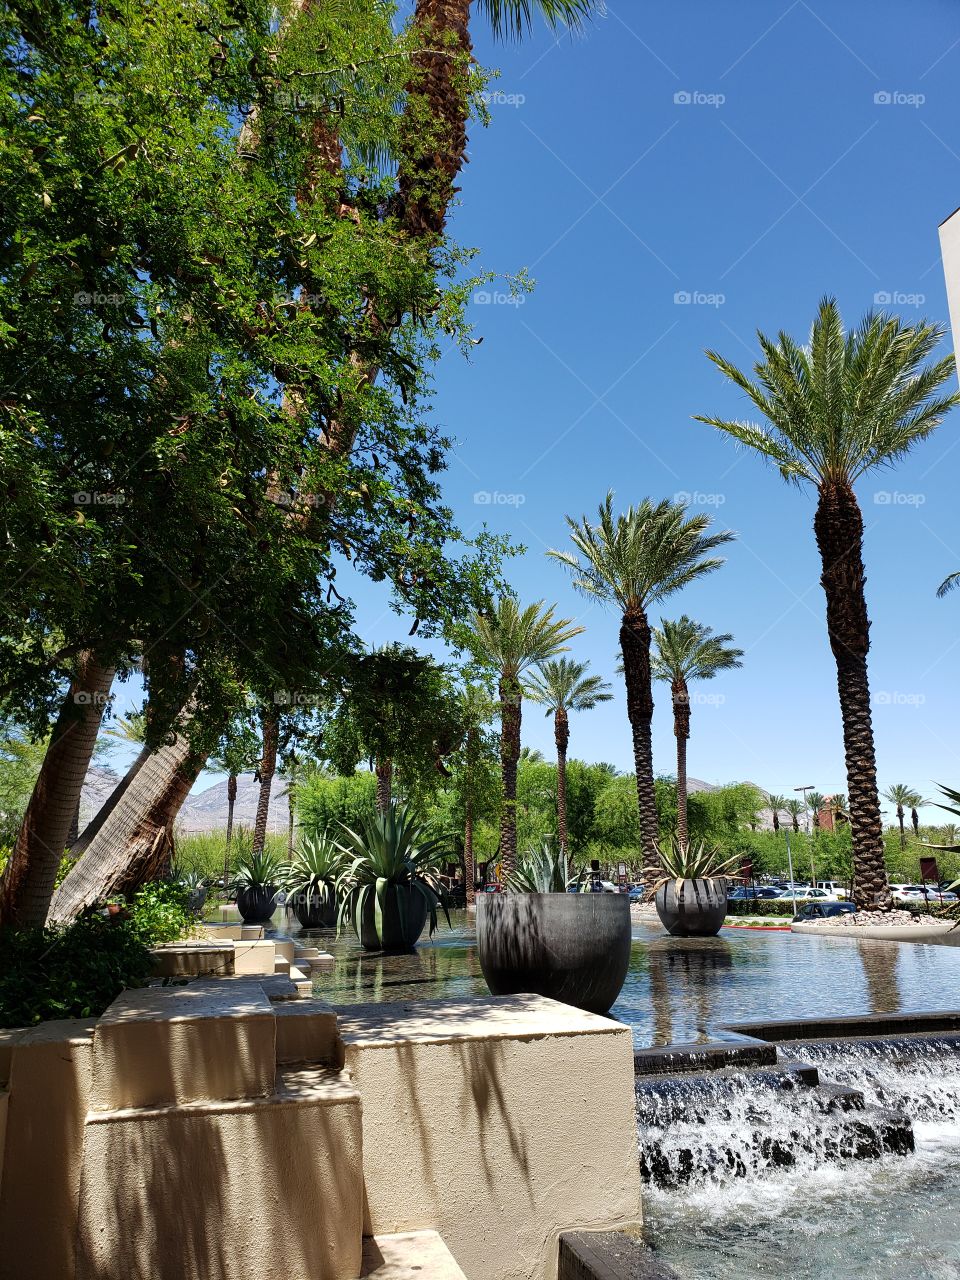 View of outdoor fountains, waterfalls, and palm trees at Red Rock Casino and Resort, Las Vegas, Nevada, USA